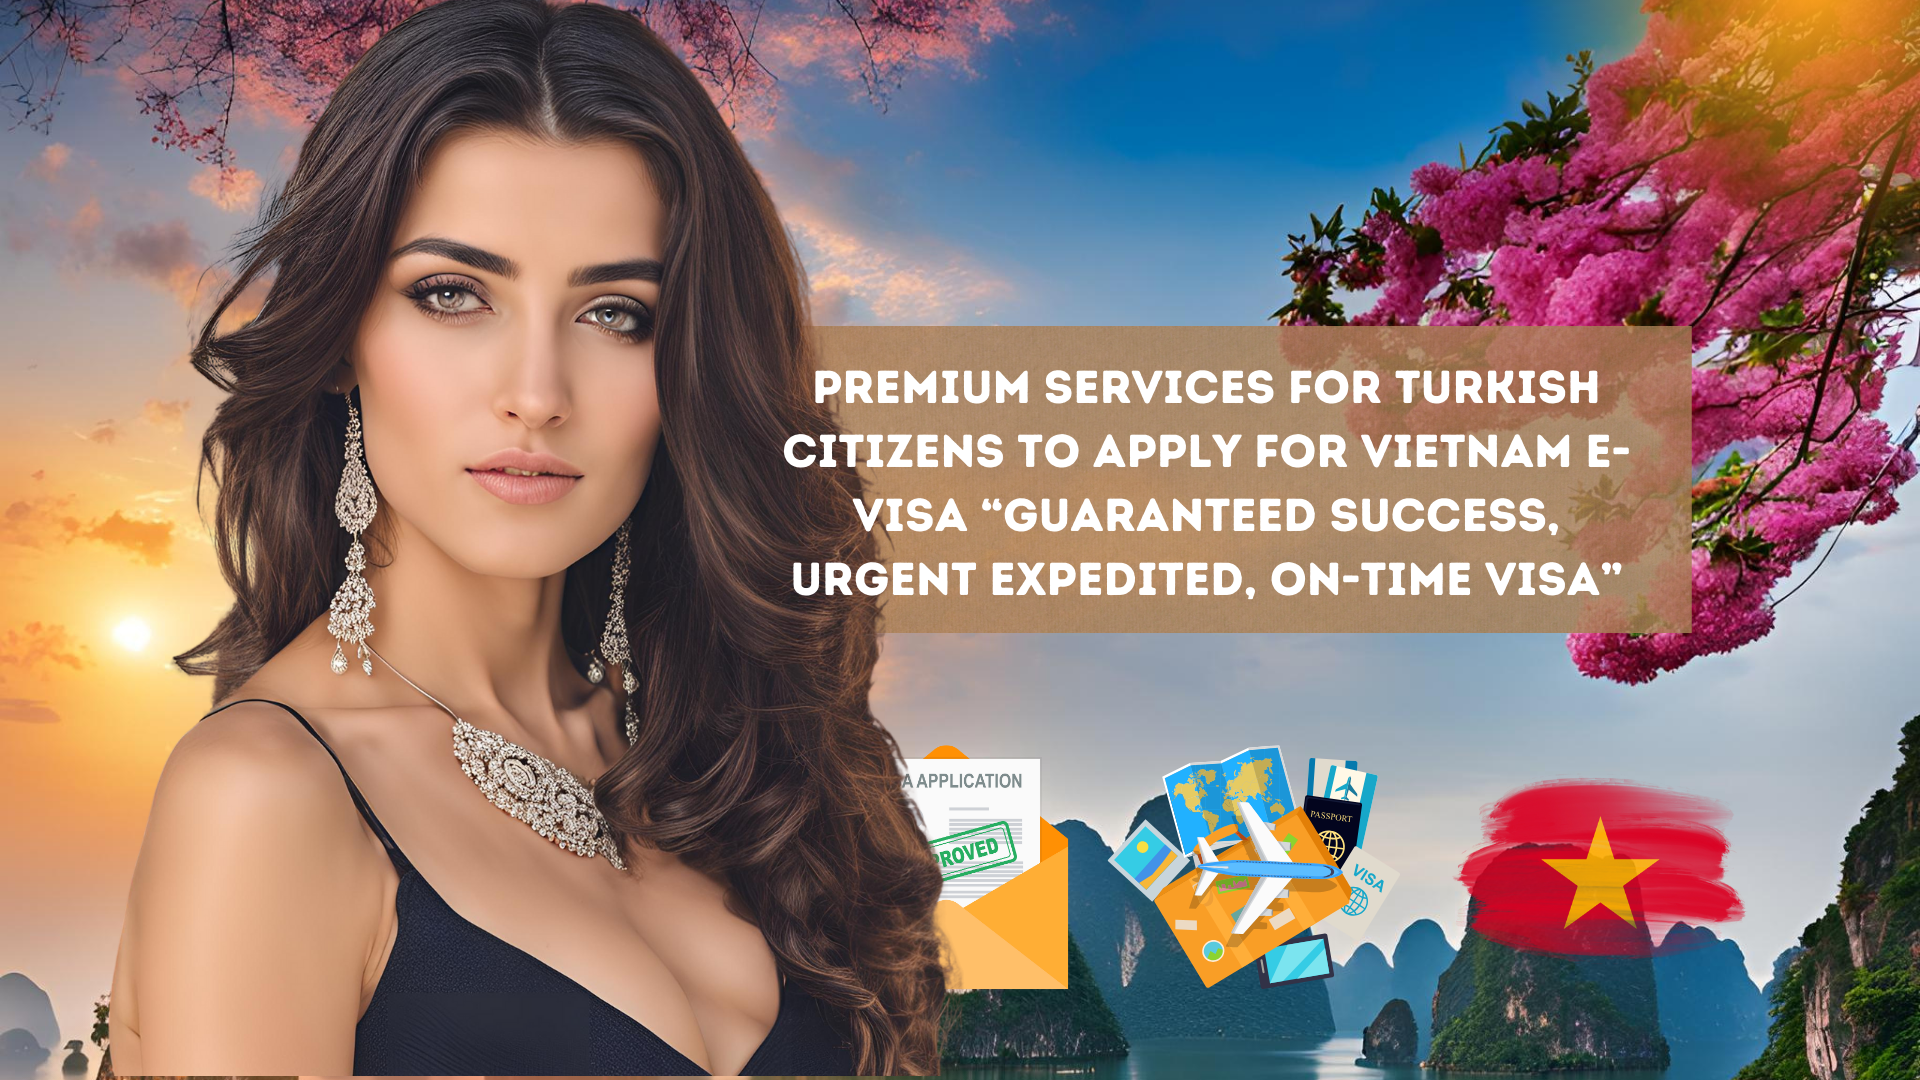 Premium Services for Turkish Citizens to apply for Vietnam e-visa “Guaranteed success, urgent expedited, on-time visa”